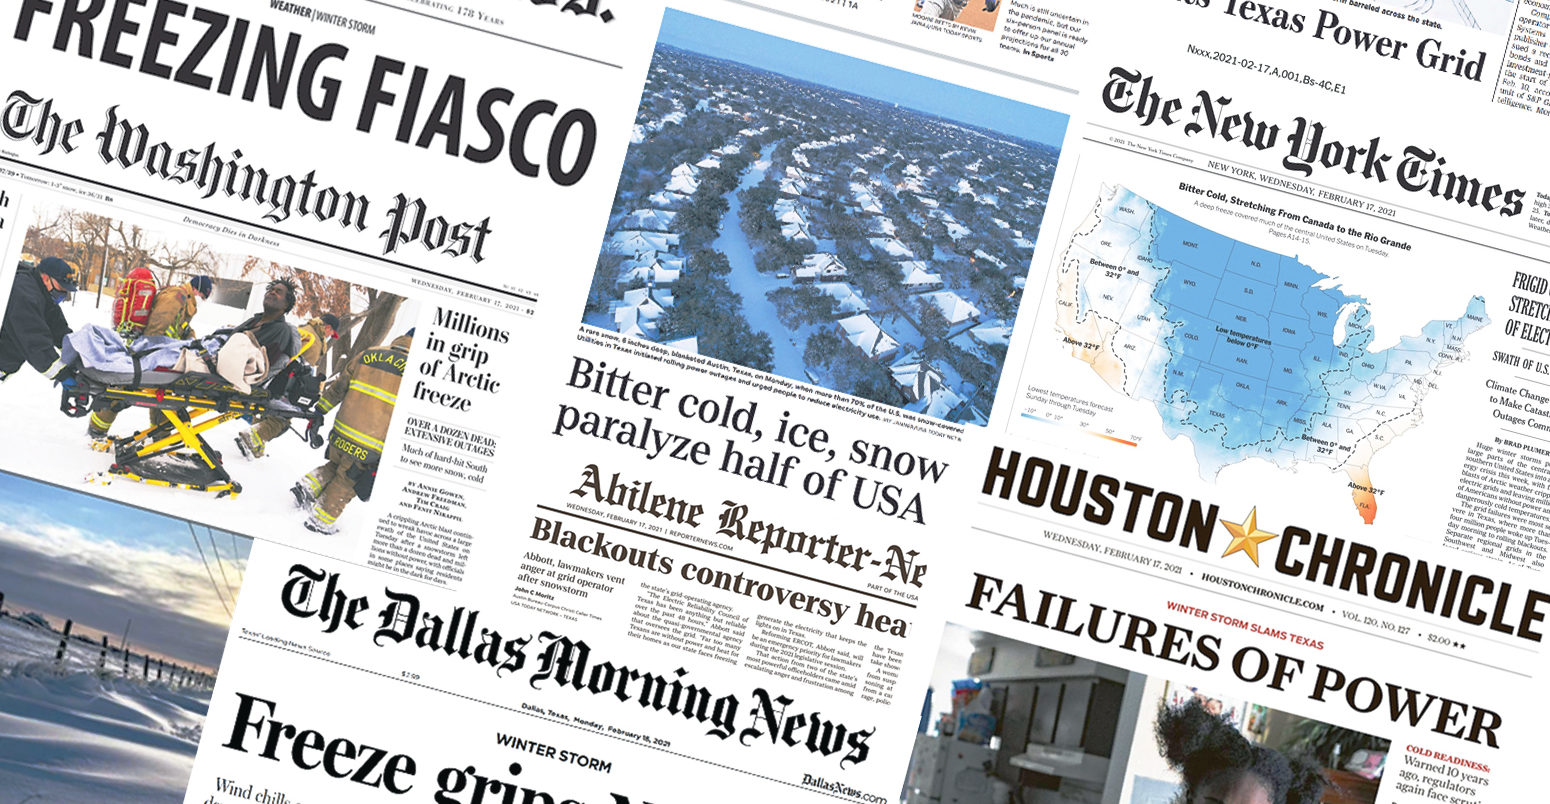 Texas deep freeze power blackouts and the role of global warming